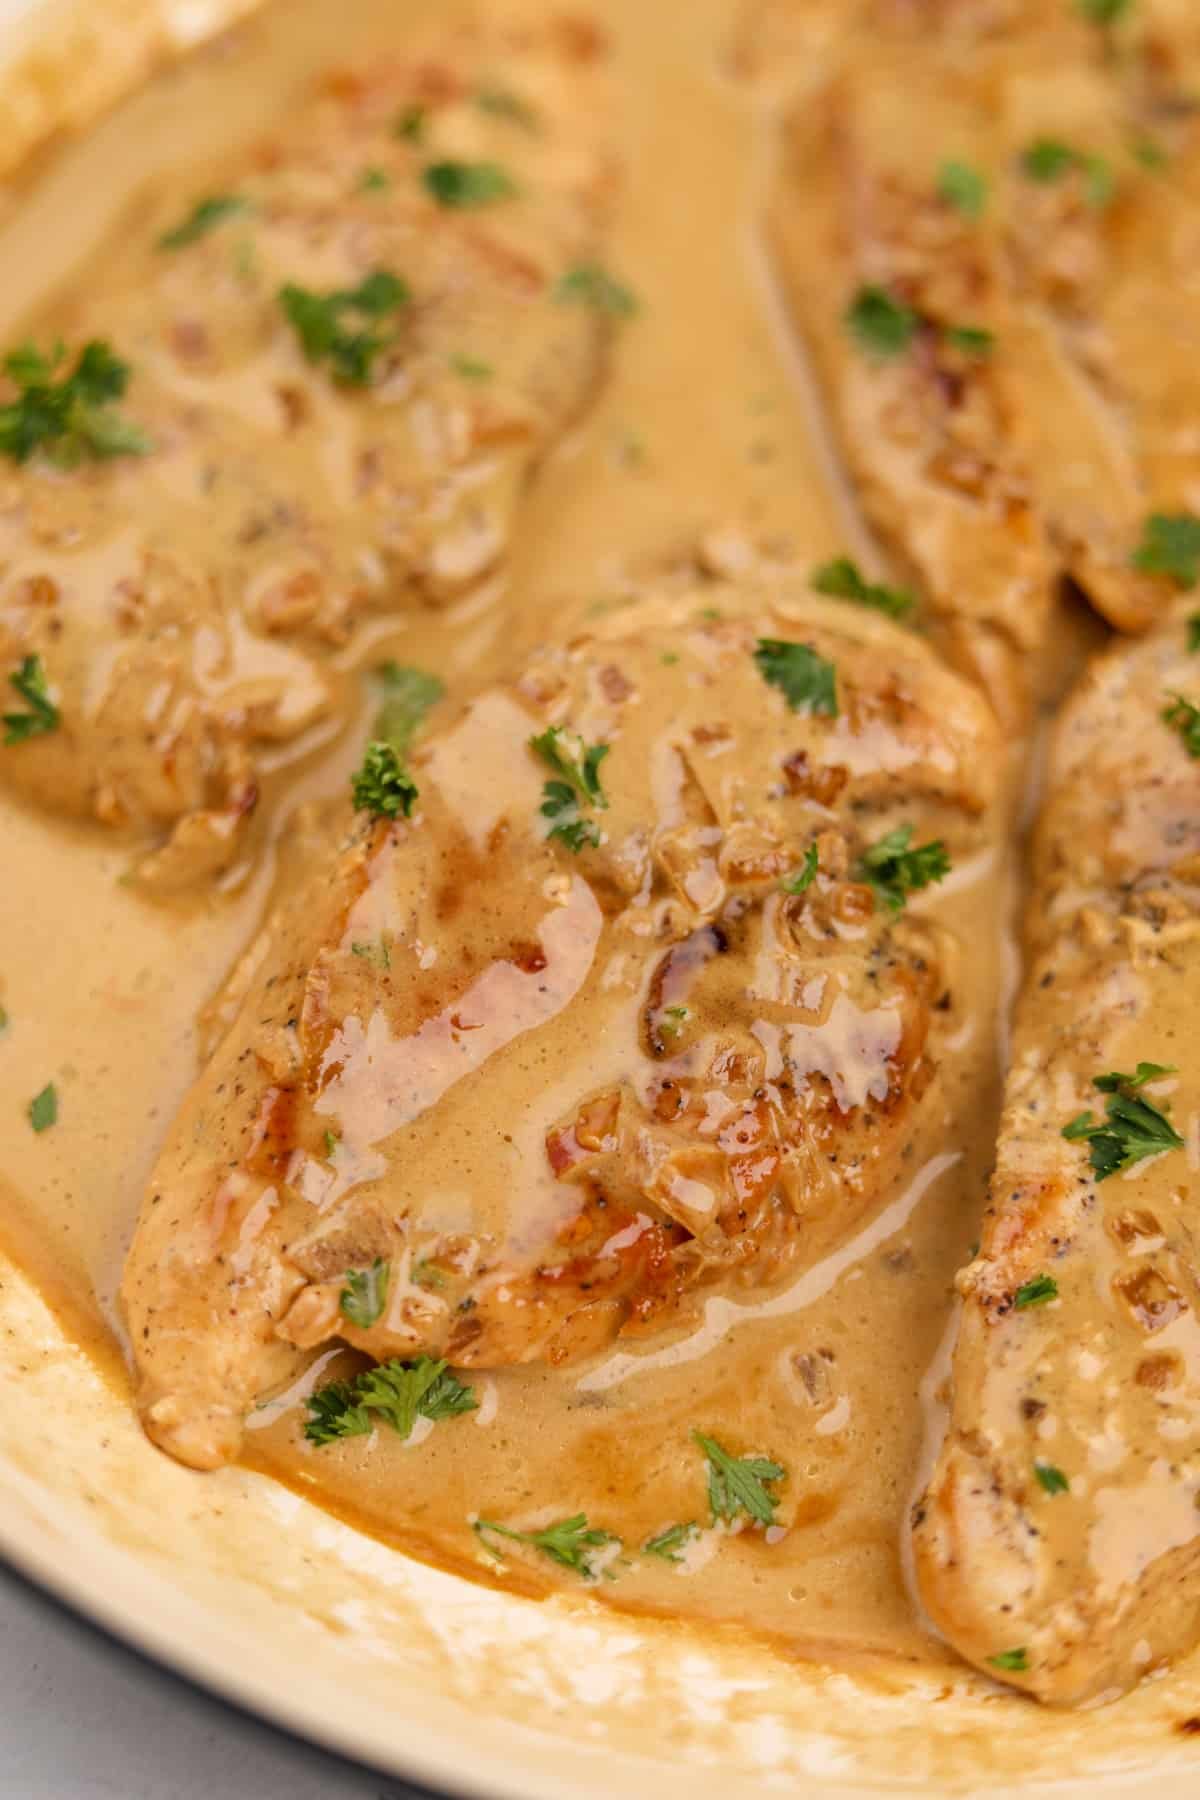 Chicken breasts in a creamy sauce and garnished with parsley.